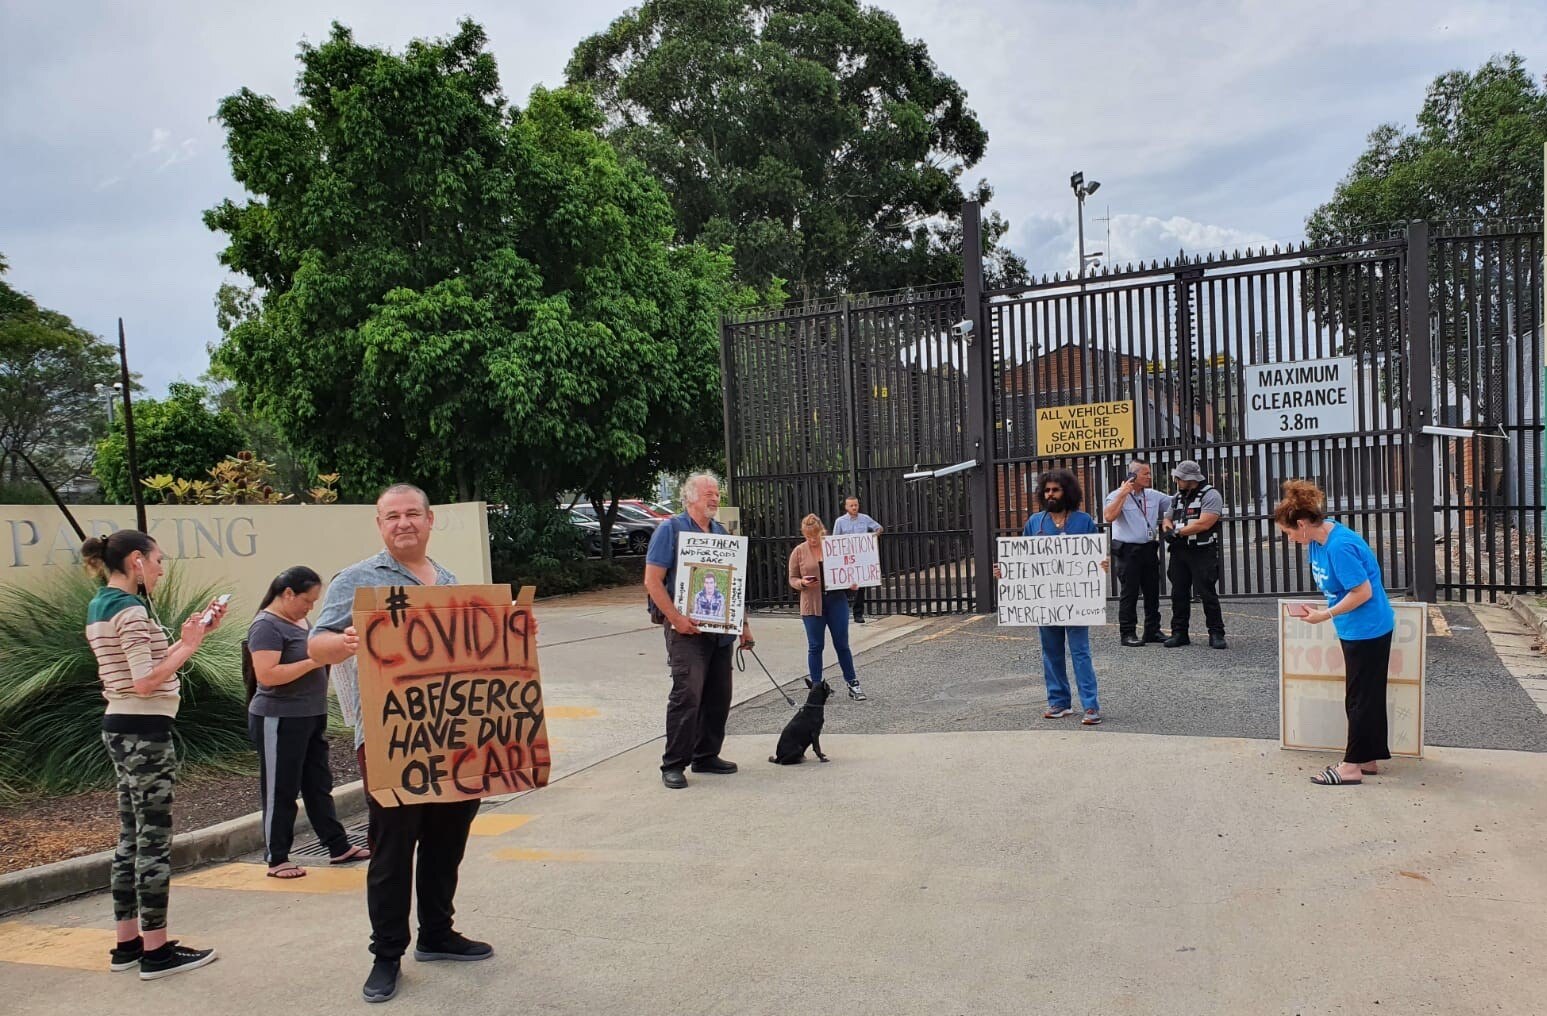 Protest in front of Villawood Detention centre